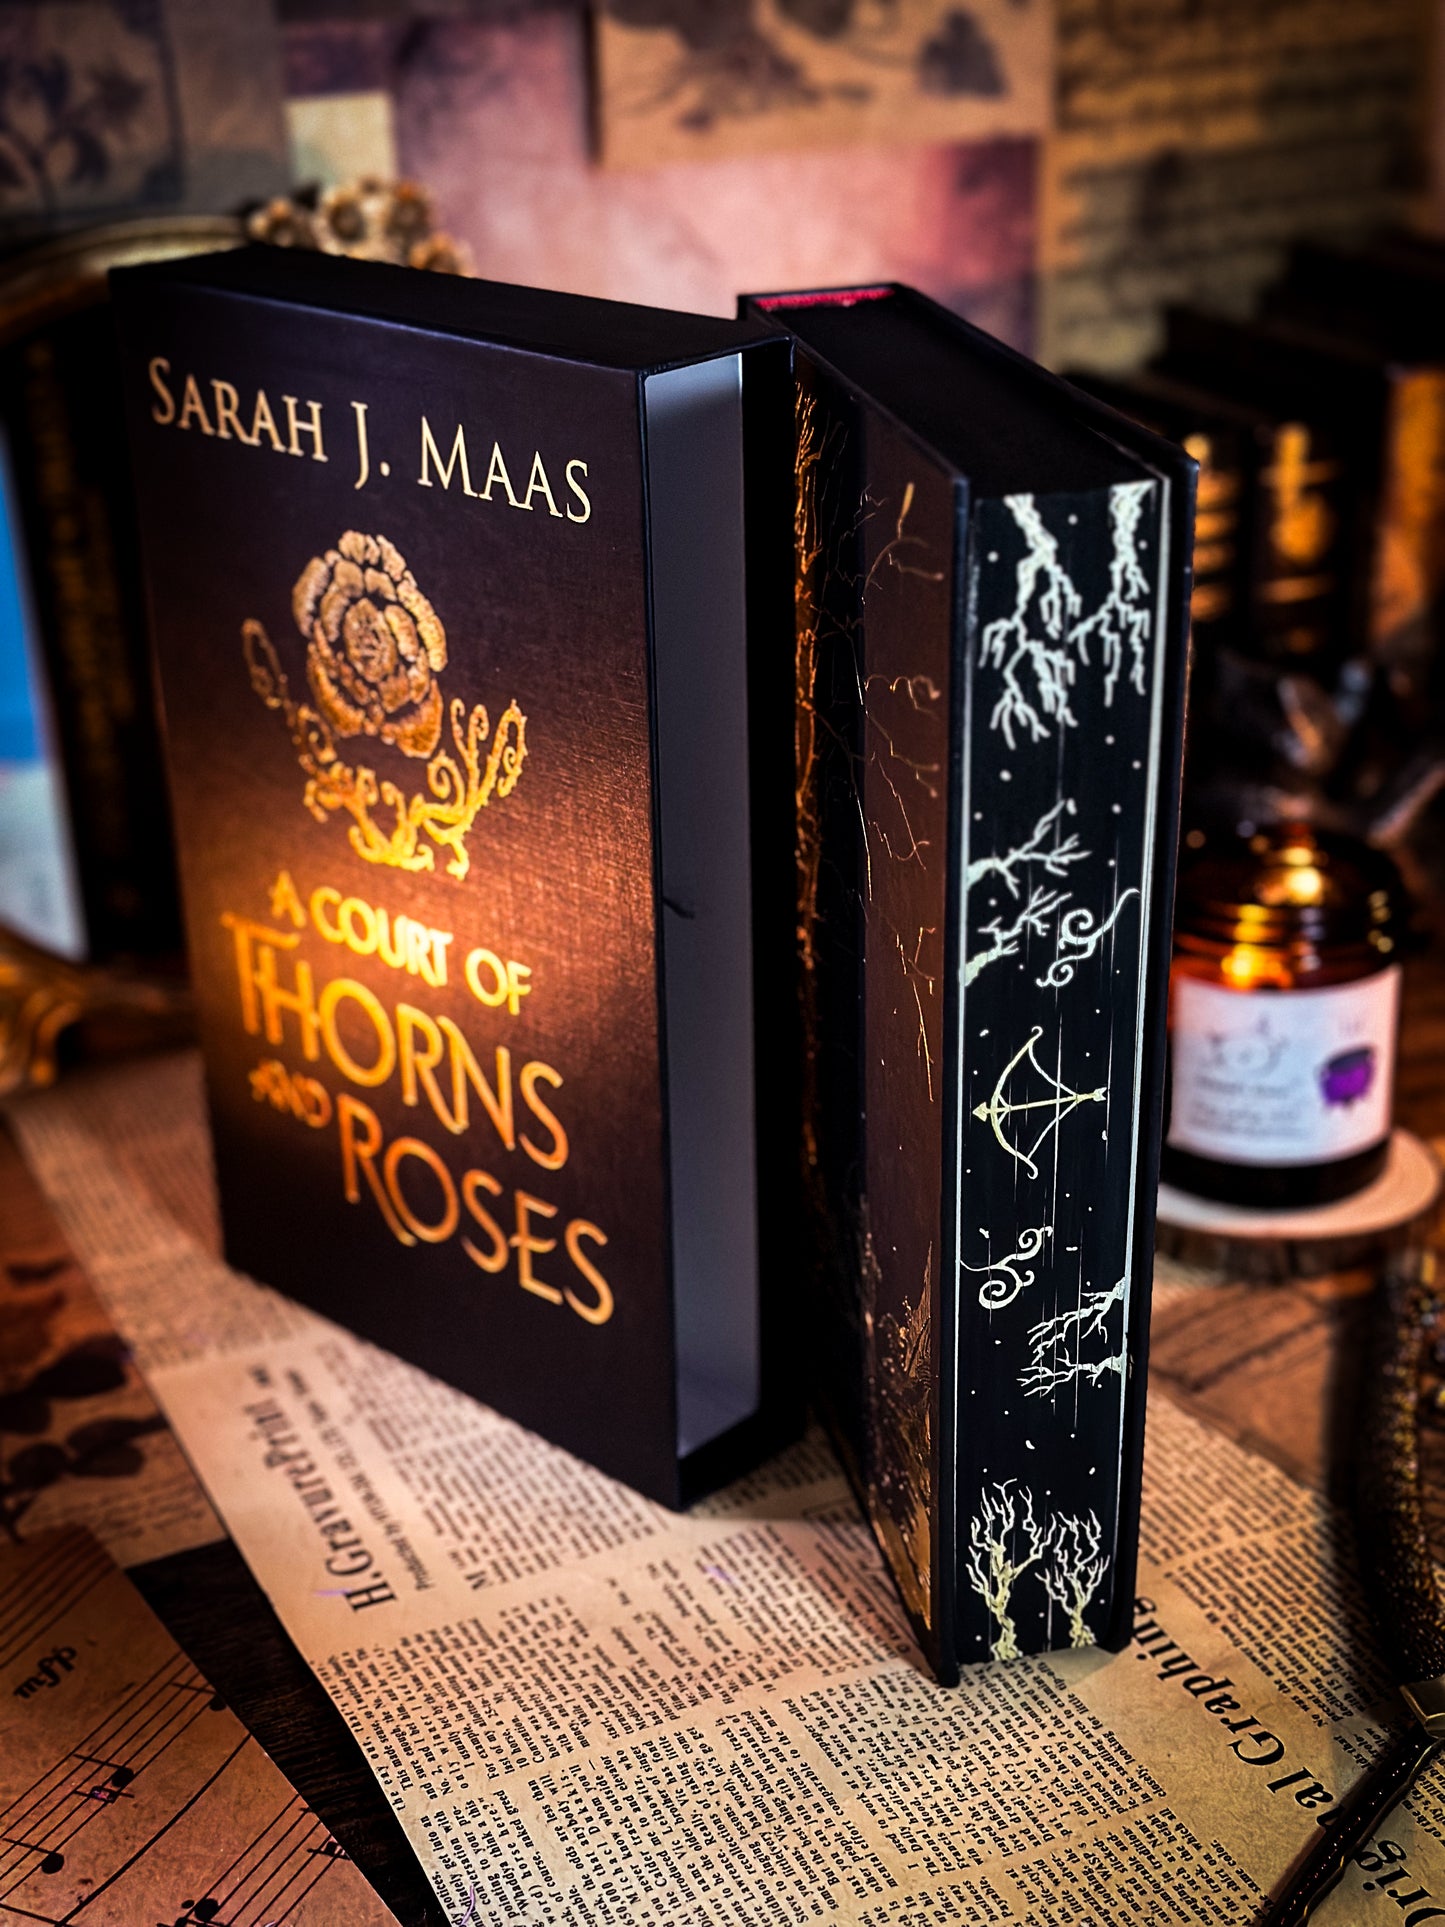 A Court of Thorns and Roses Collector's Edition HAND-PAINTED EDGES